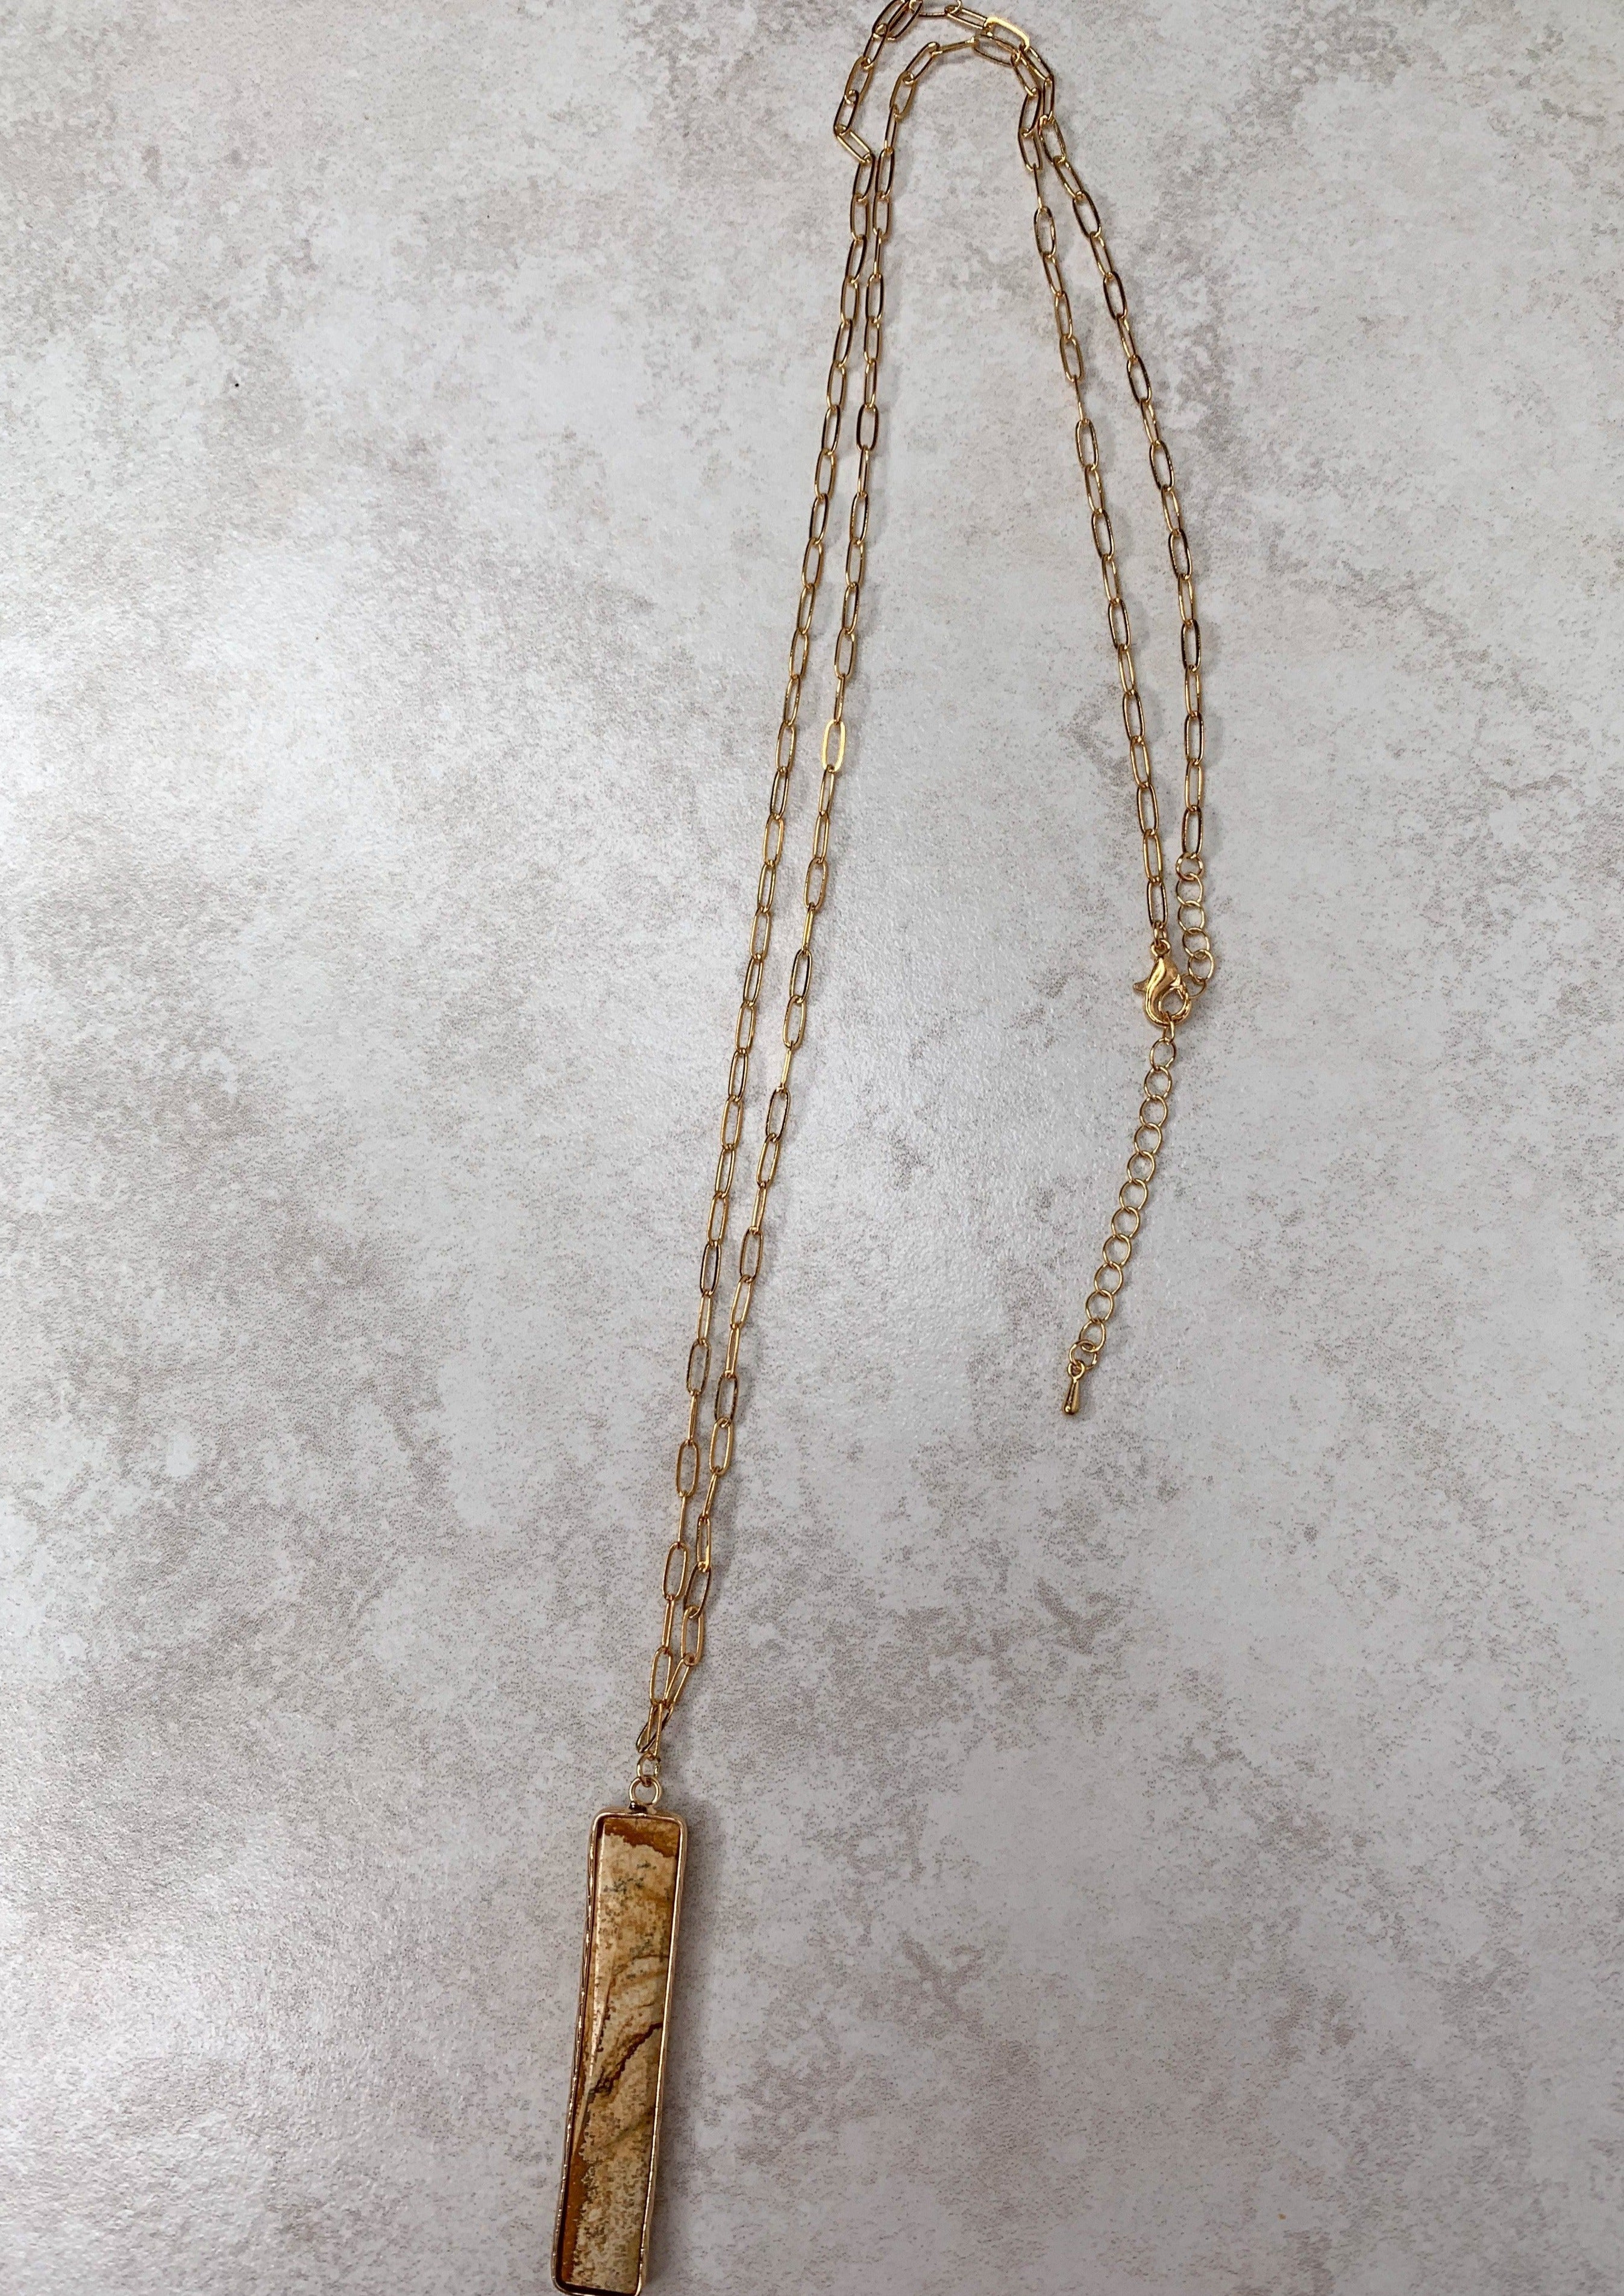 Earth Tone Pendant with Gold Chain Necklace